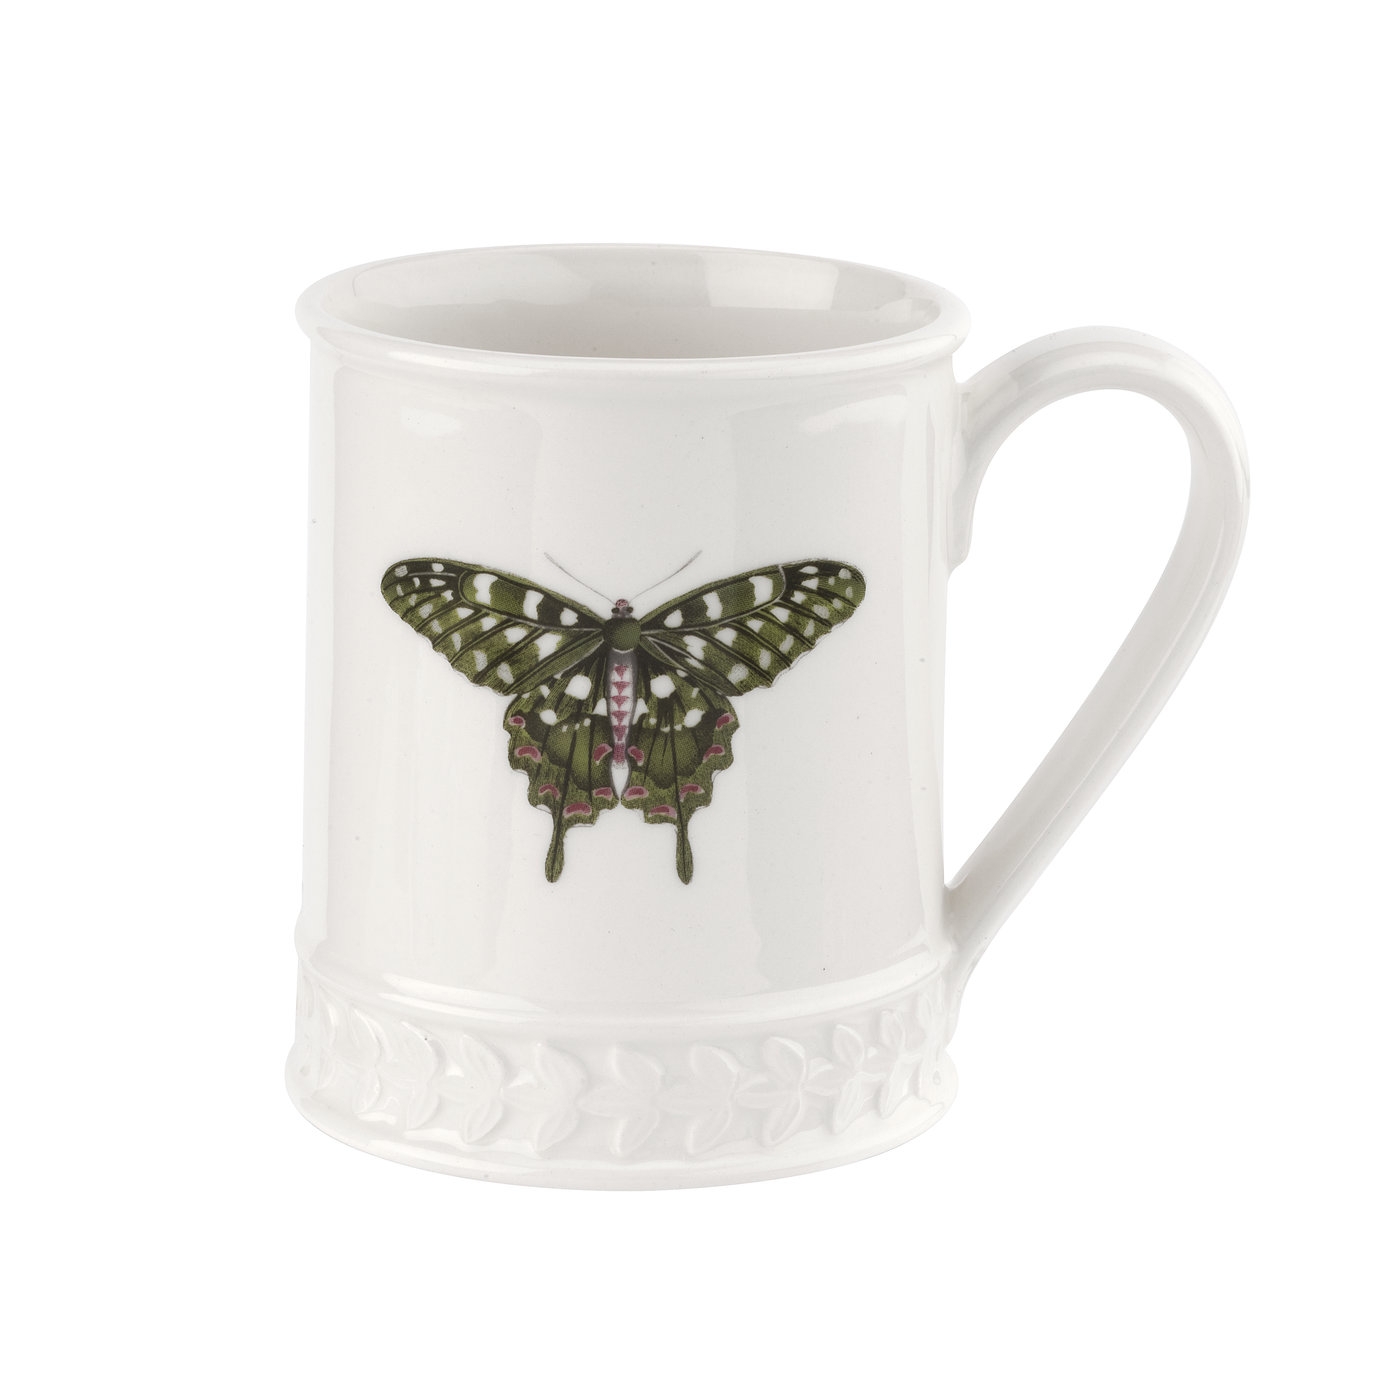 Botanic Garden Harmony Embossed 16 fl.oz. Tankard, Forest Green Butterfly image number null